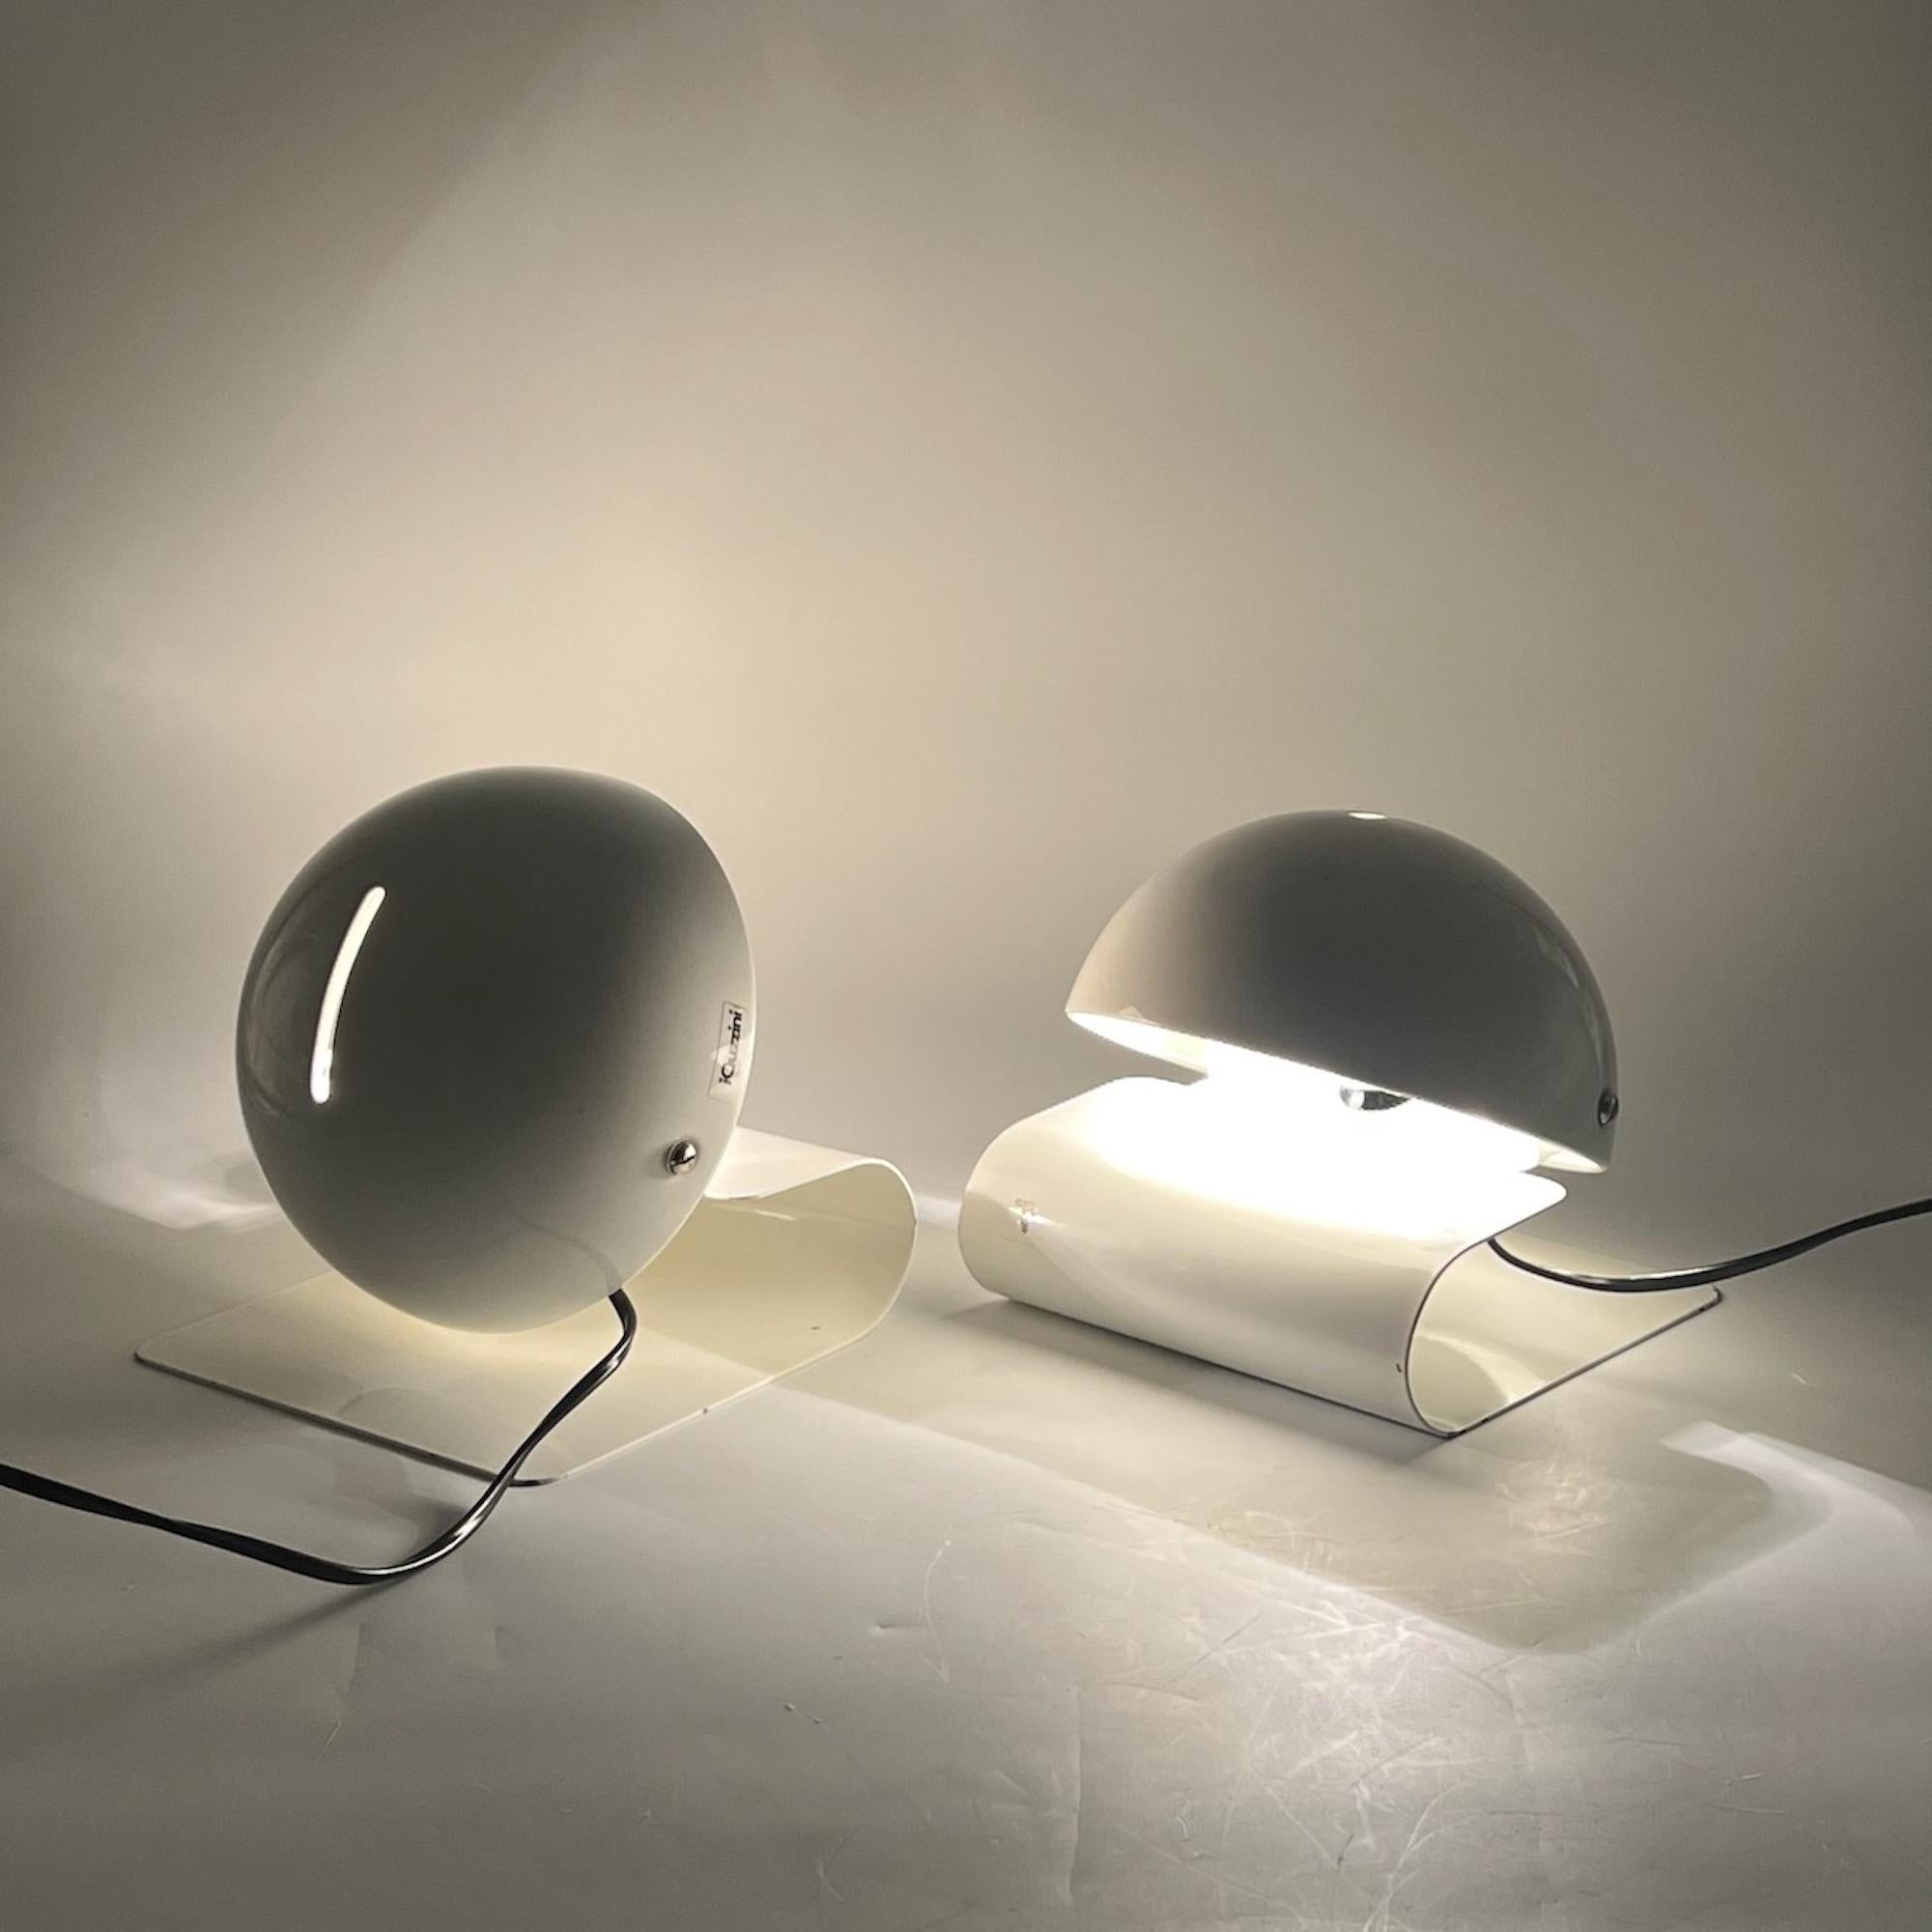 Pair of ‘Bugia’ Lamps by Giuseppe Cormio for iGuzzini, 1970s